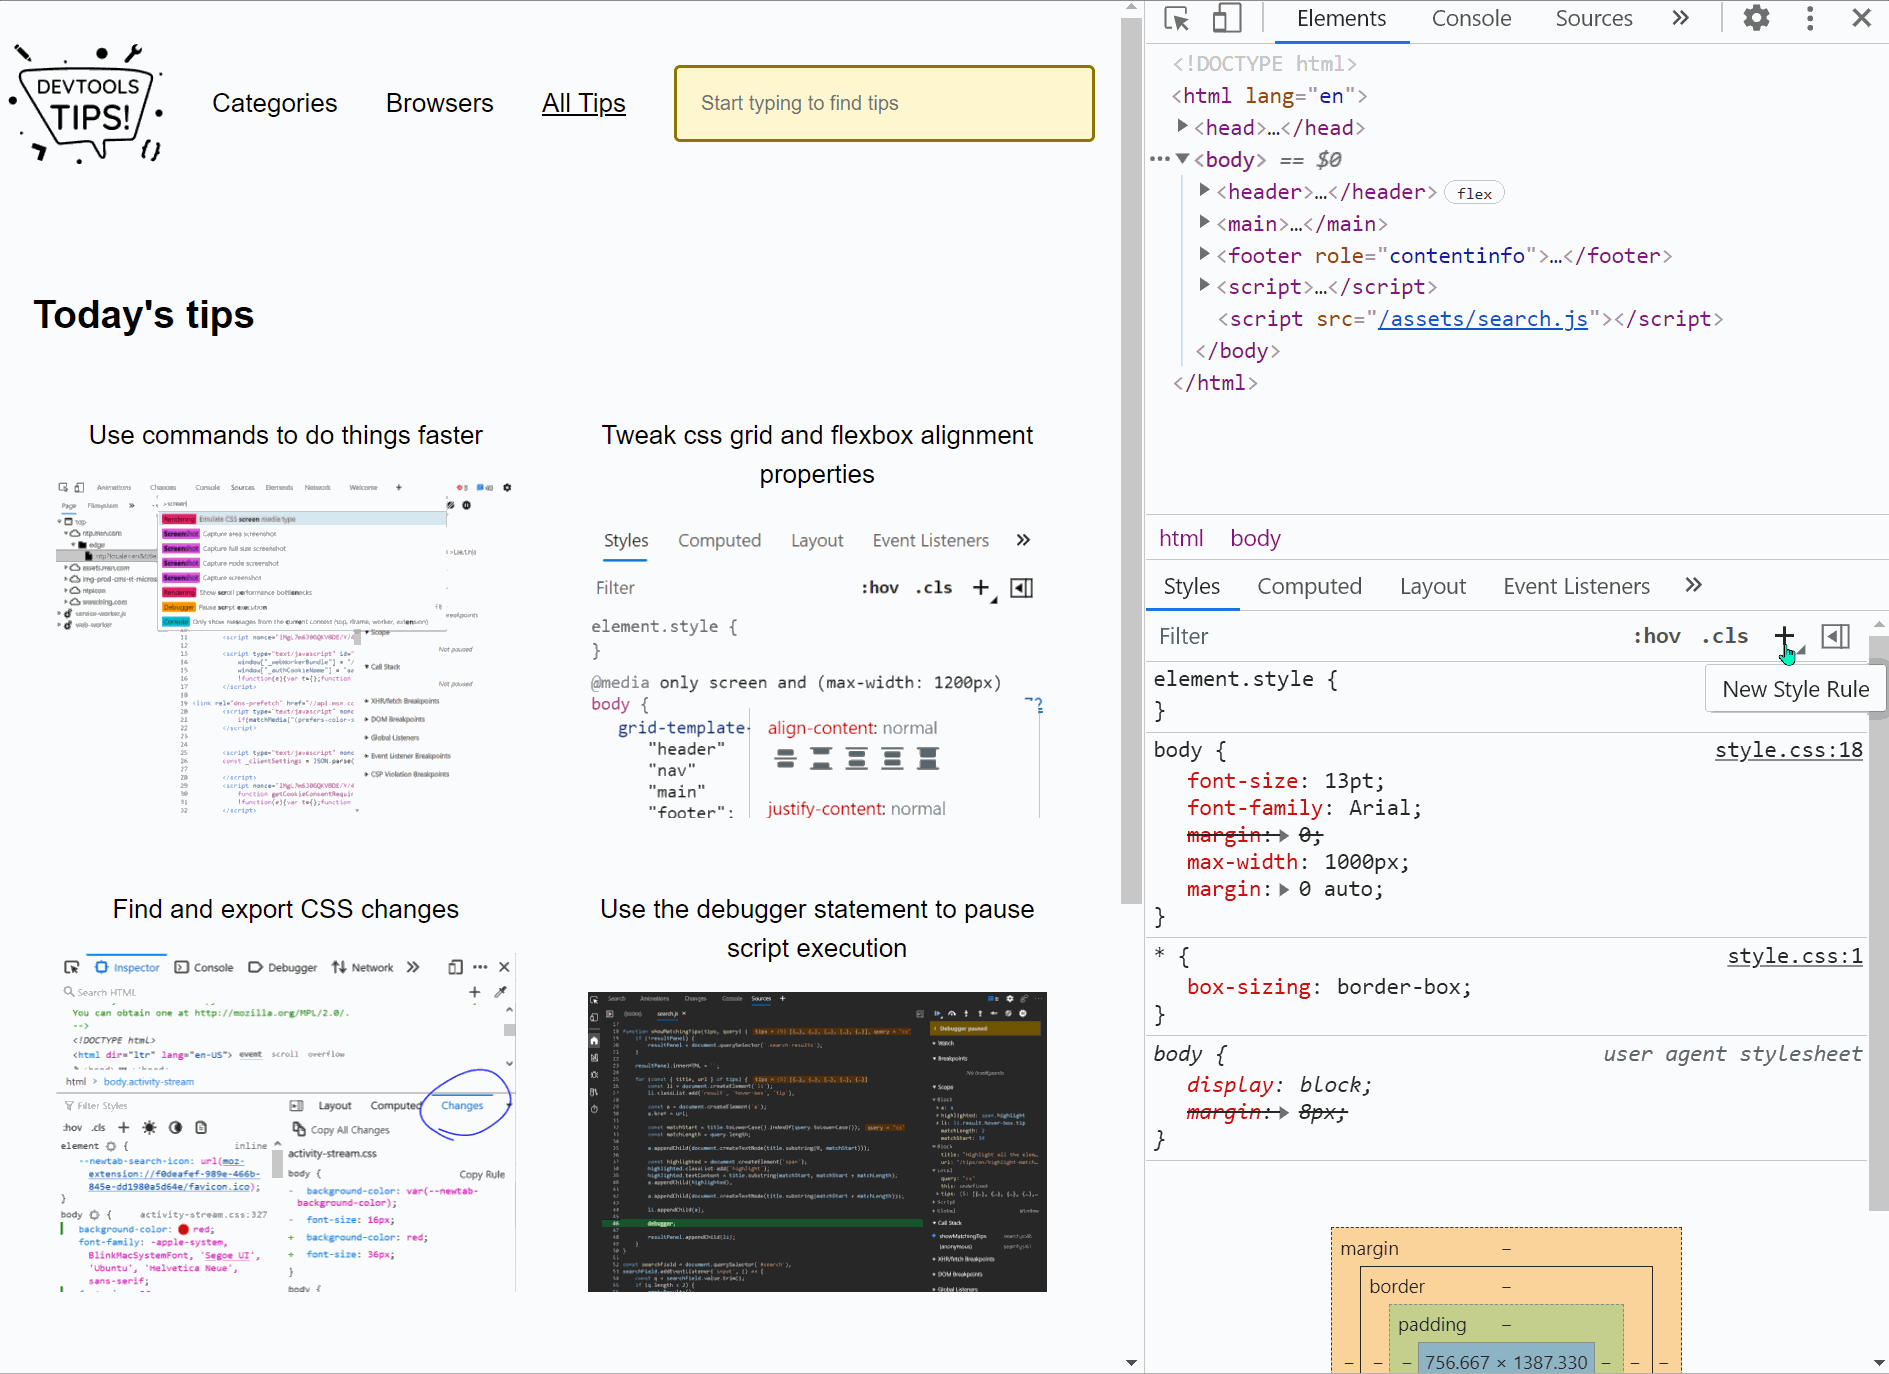 Gif animation showing how adding the rule in the styles pane if chrome devtools outlines all elements in the page